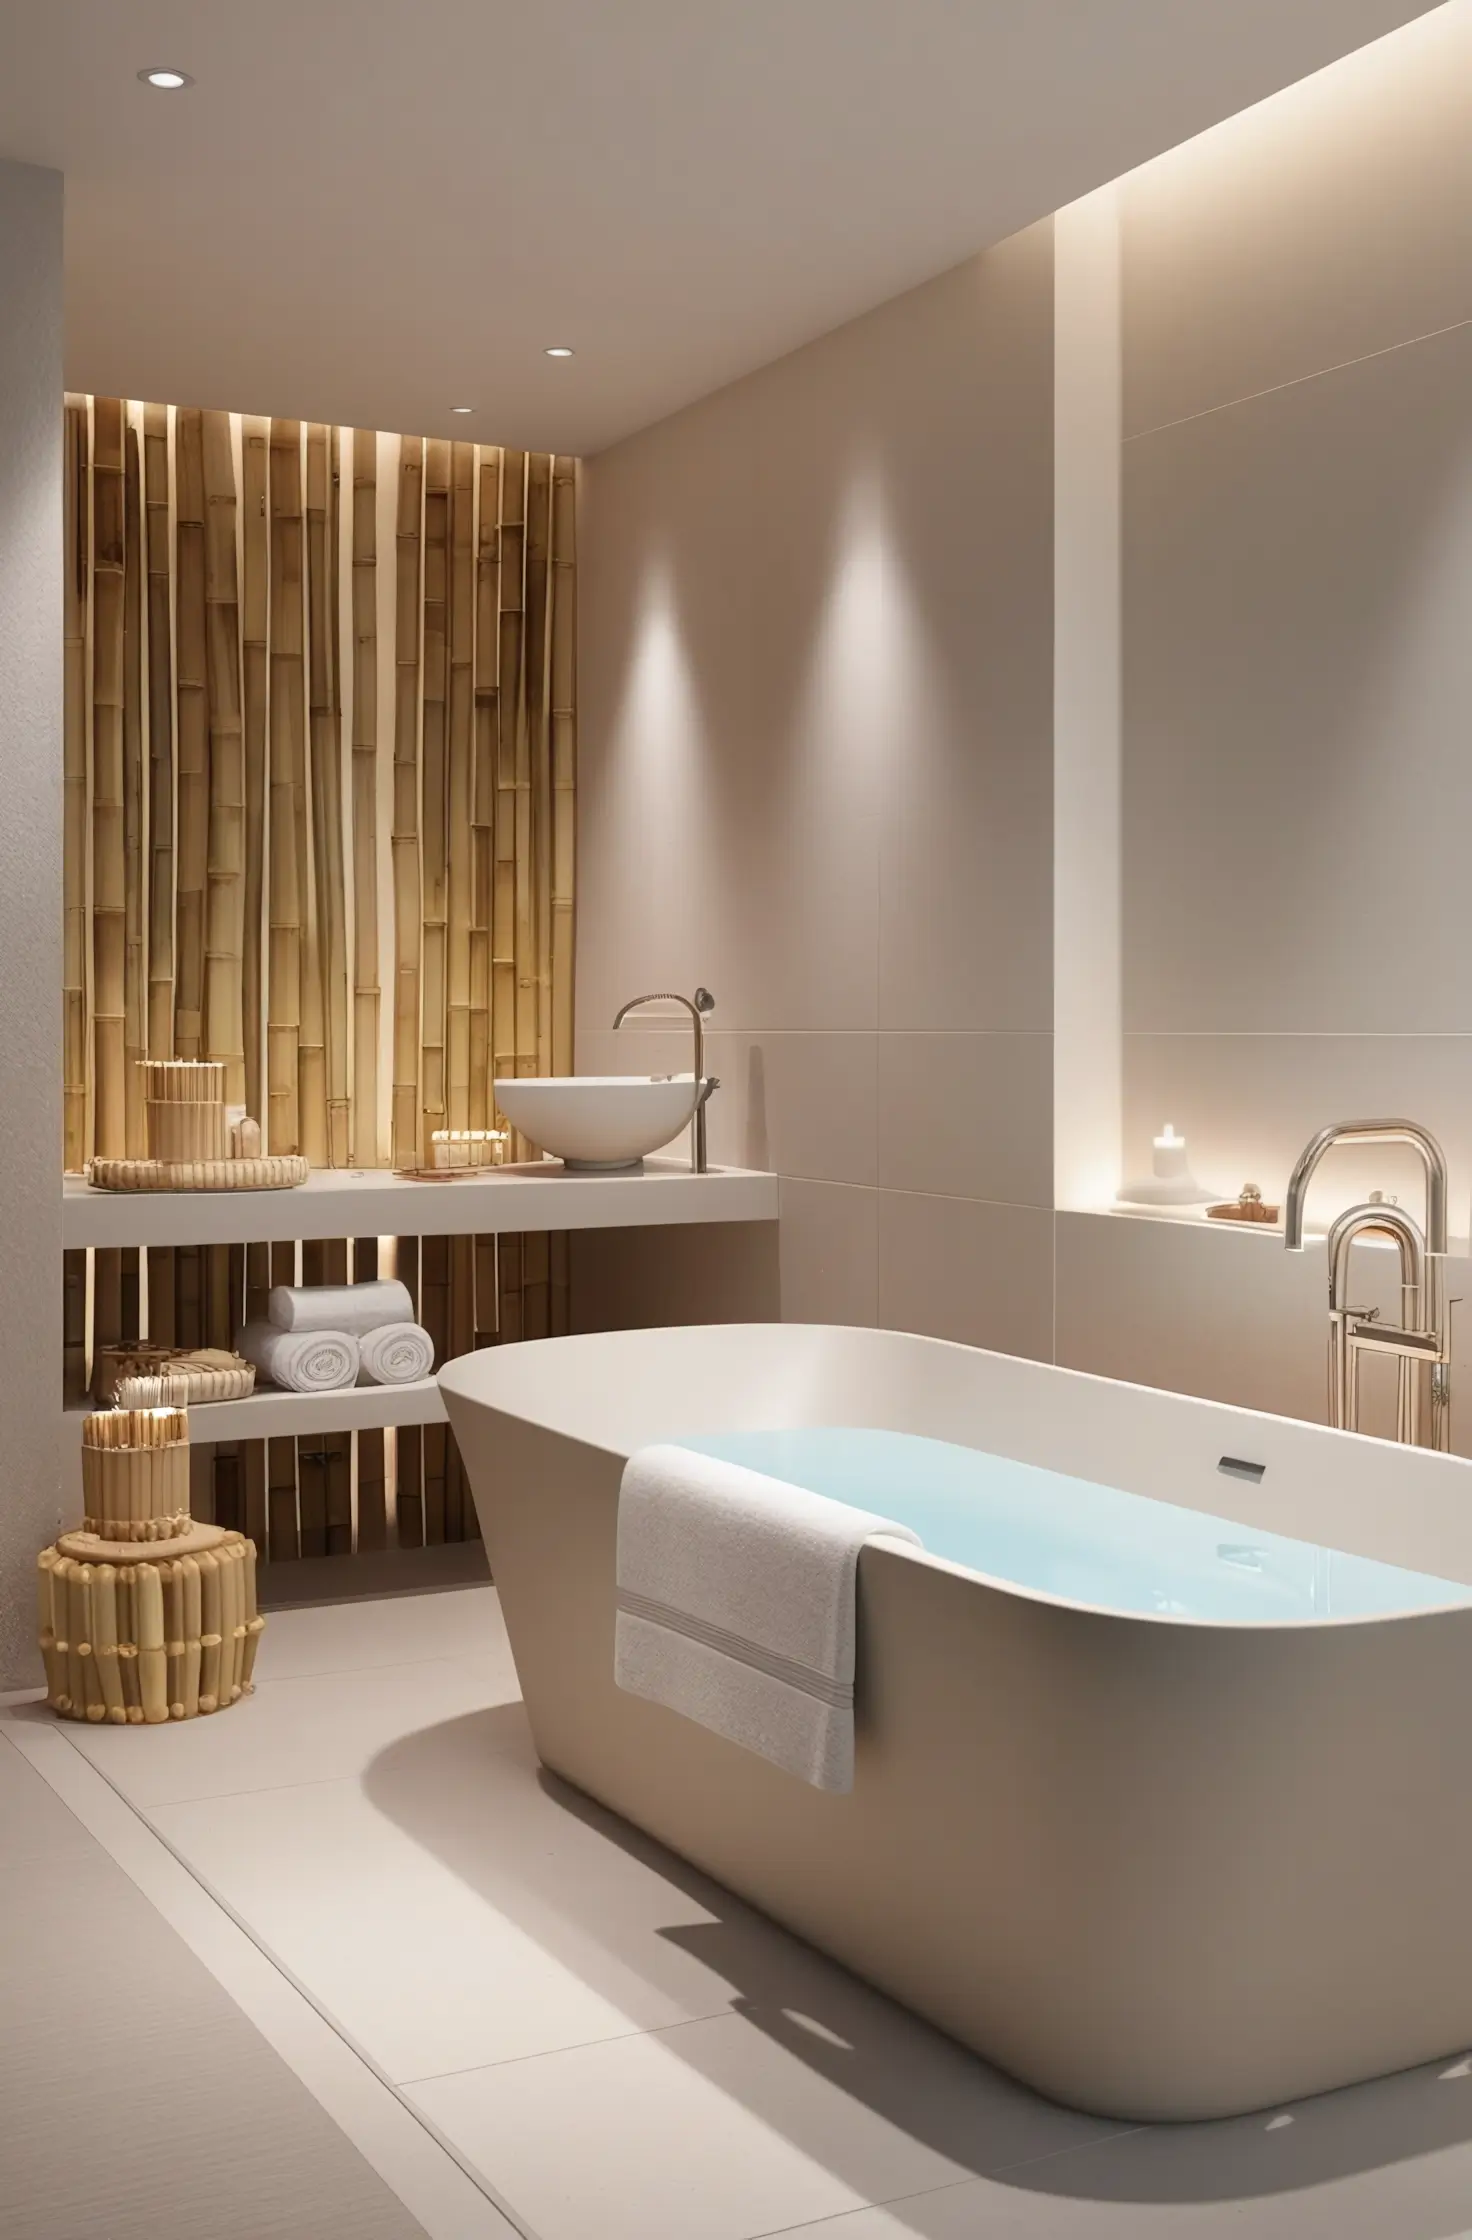 Zen bathroom with bamboo accents and soft lighting.